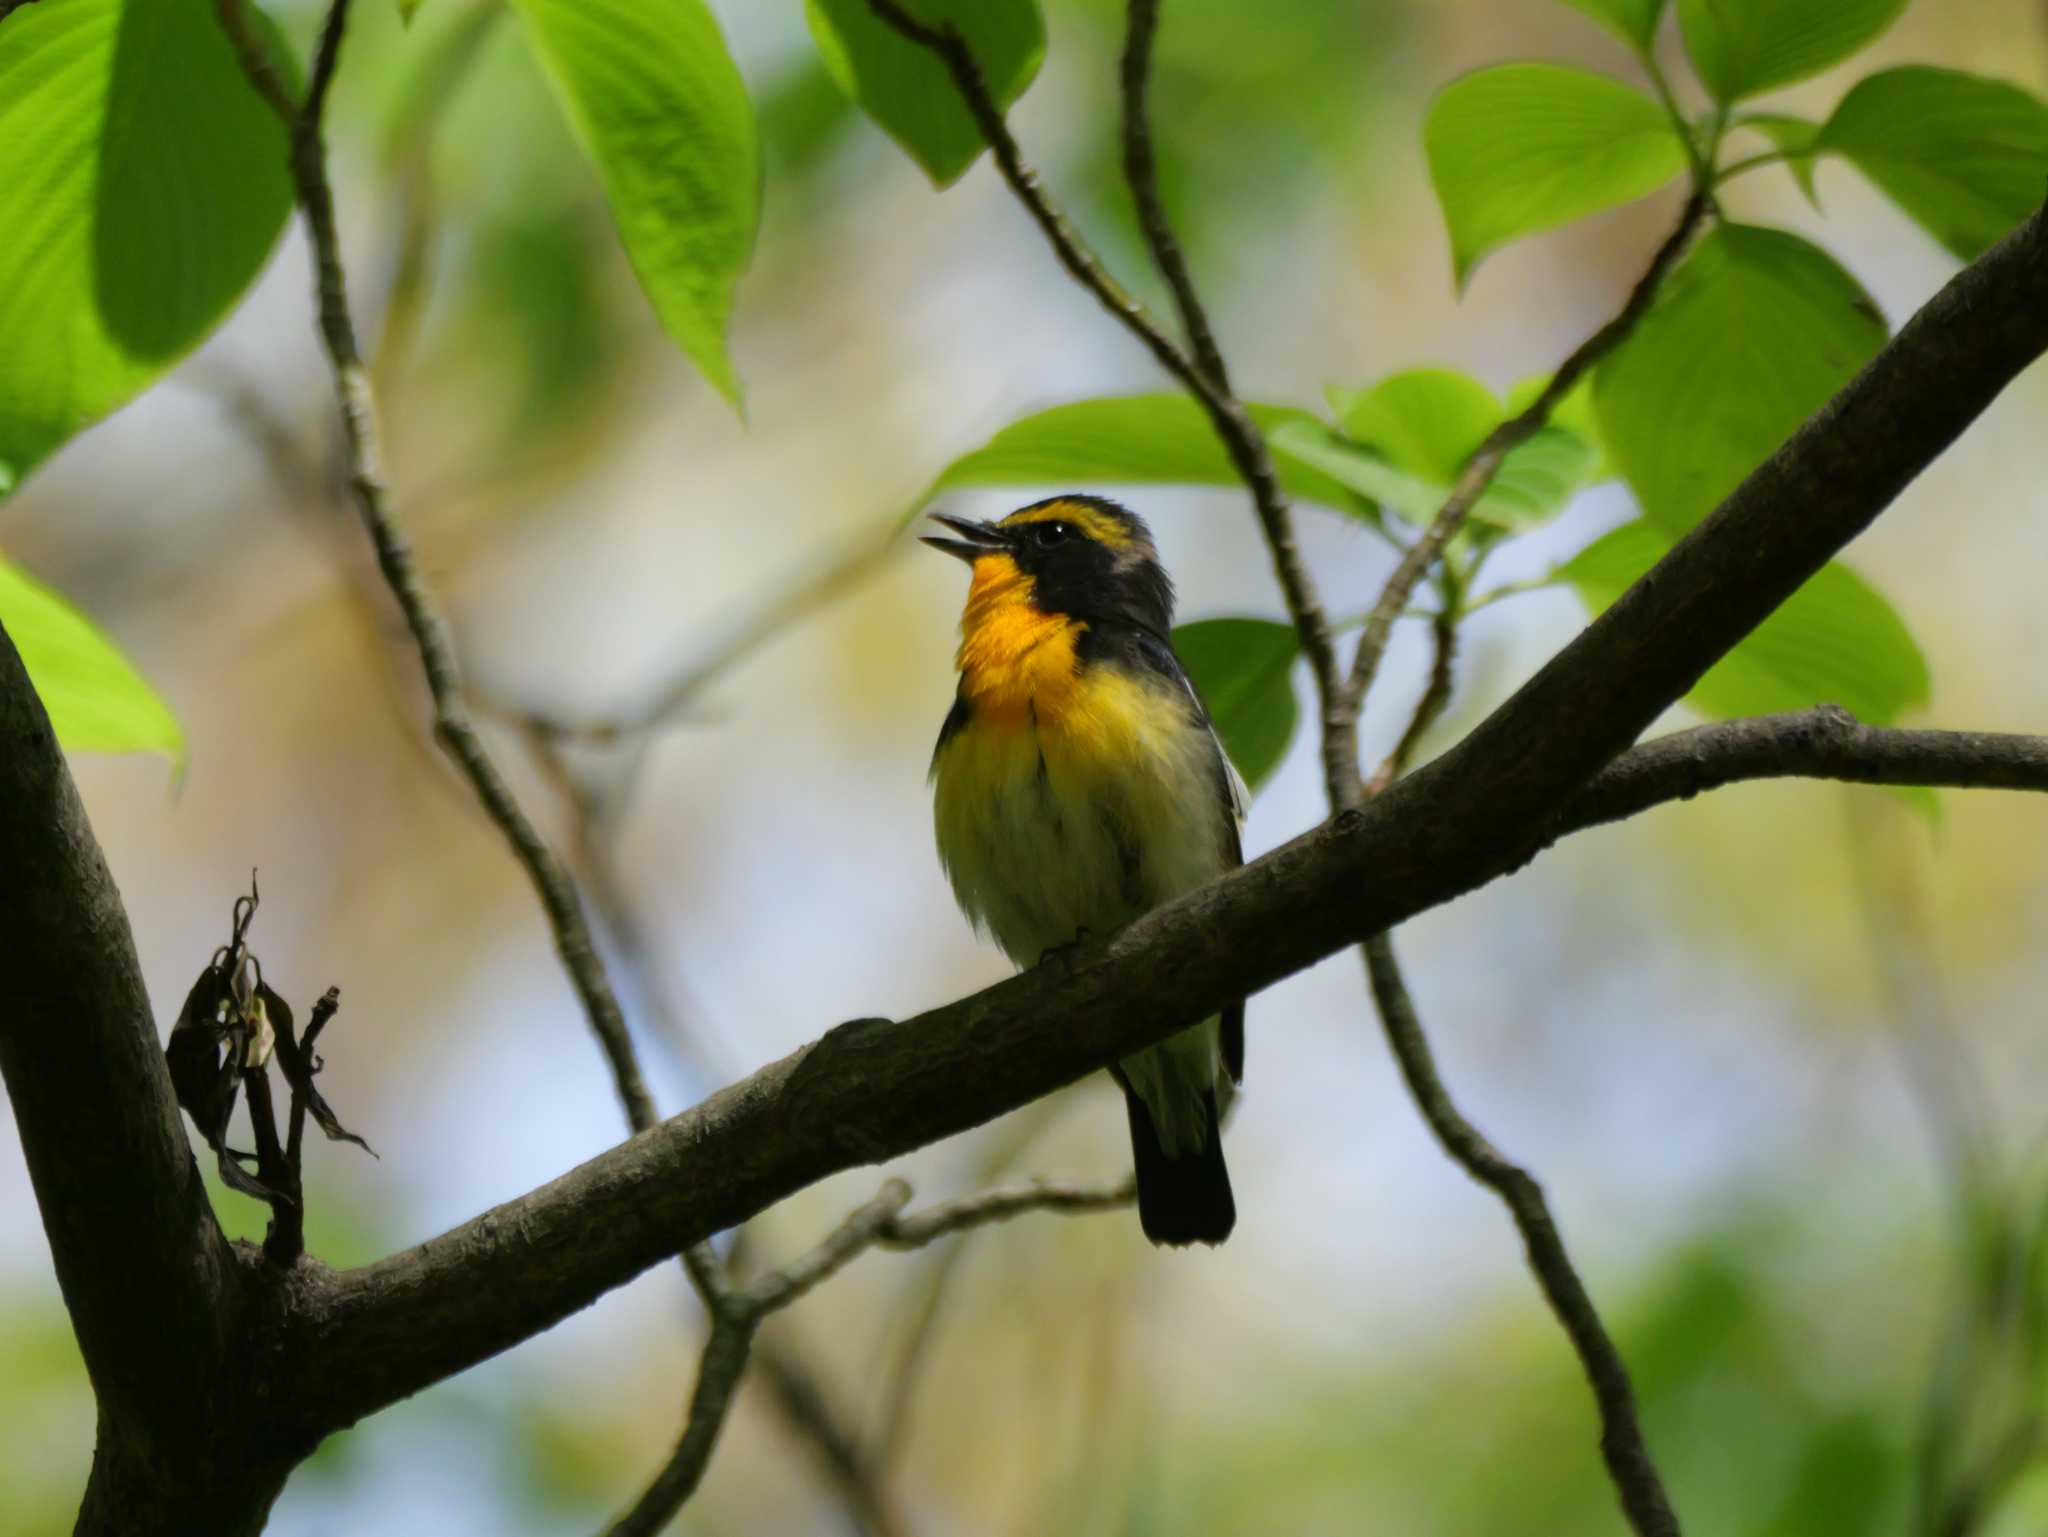 Photo of Narcissus Flycatcher at 秩父 by little birds